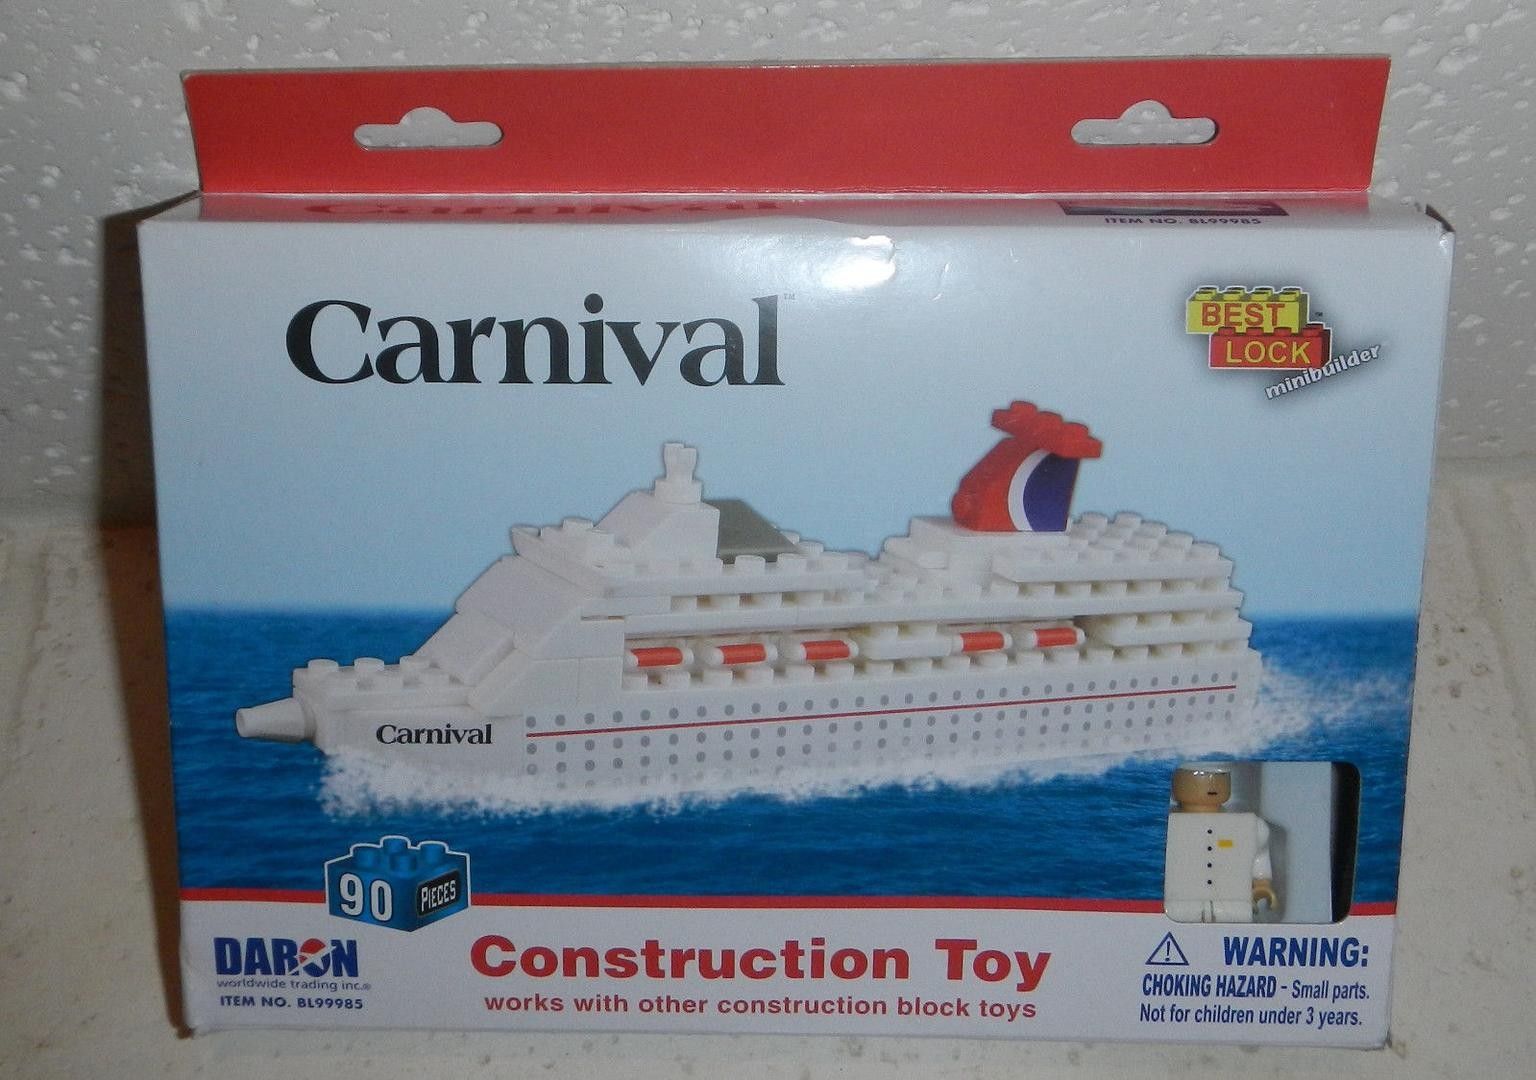 chris lupfer share toy carnival cruise ship photos